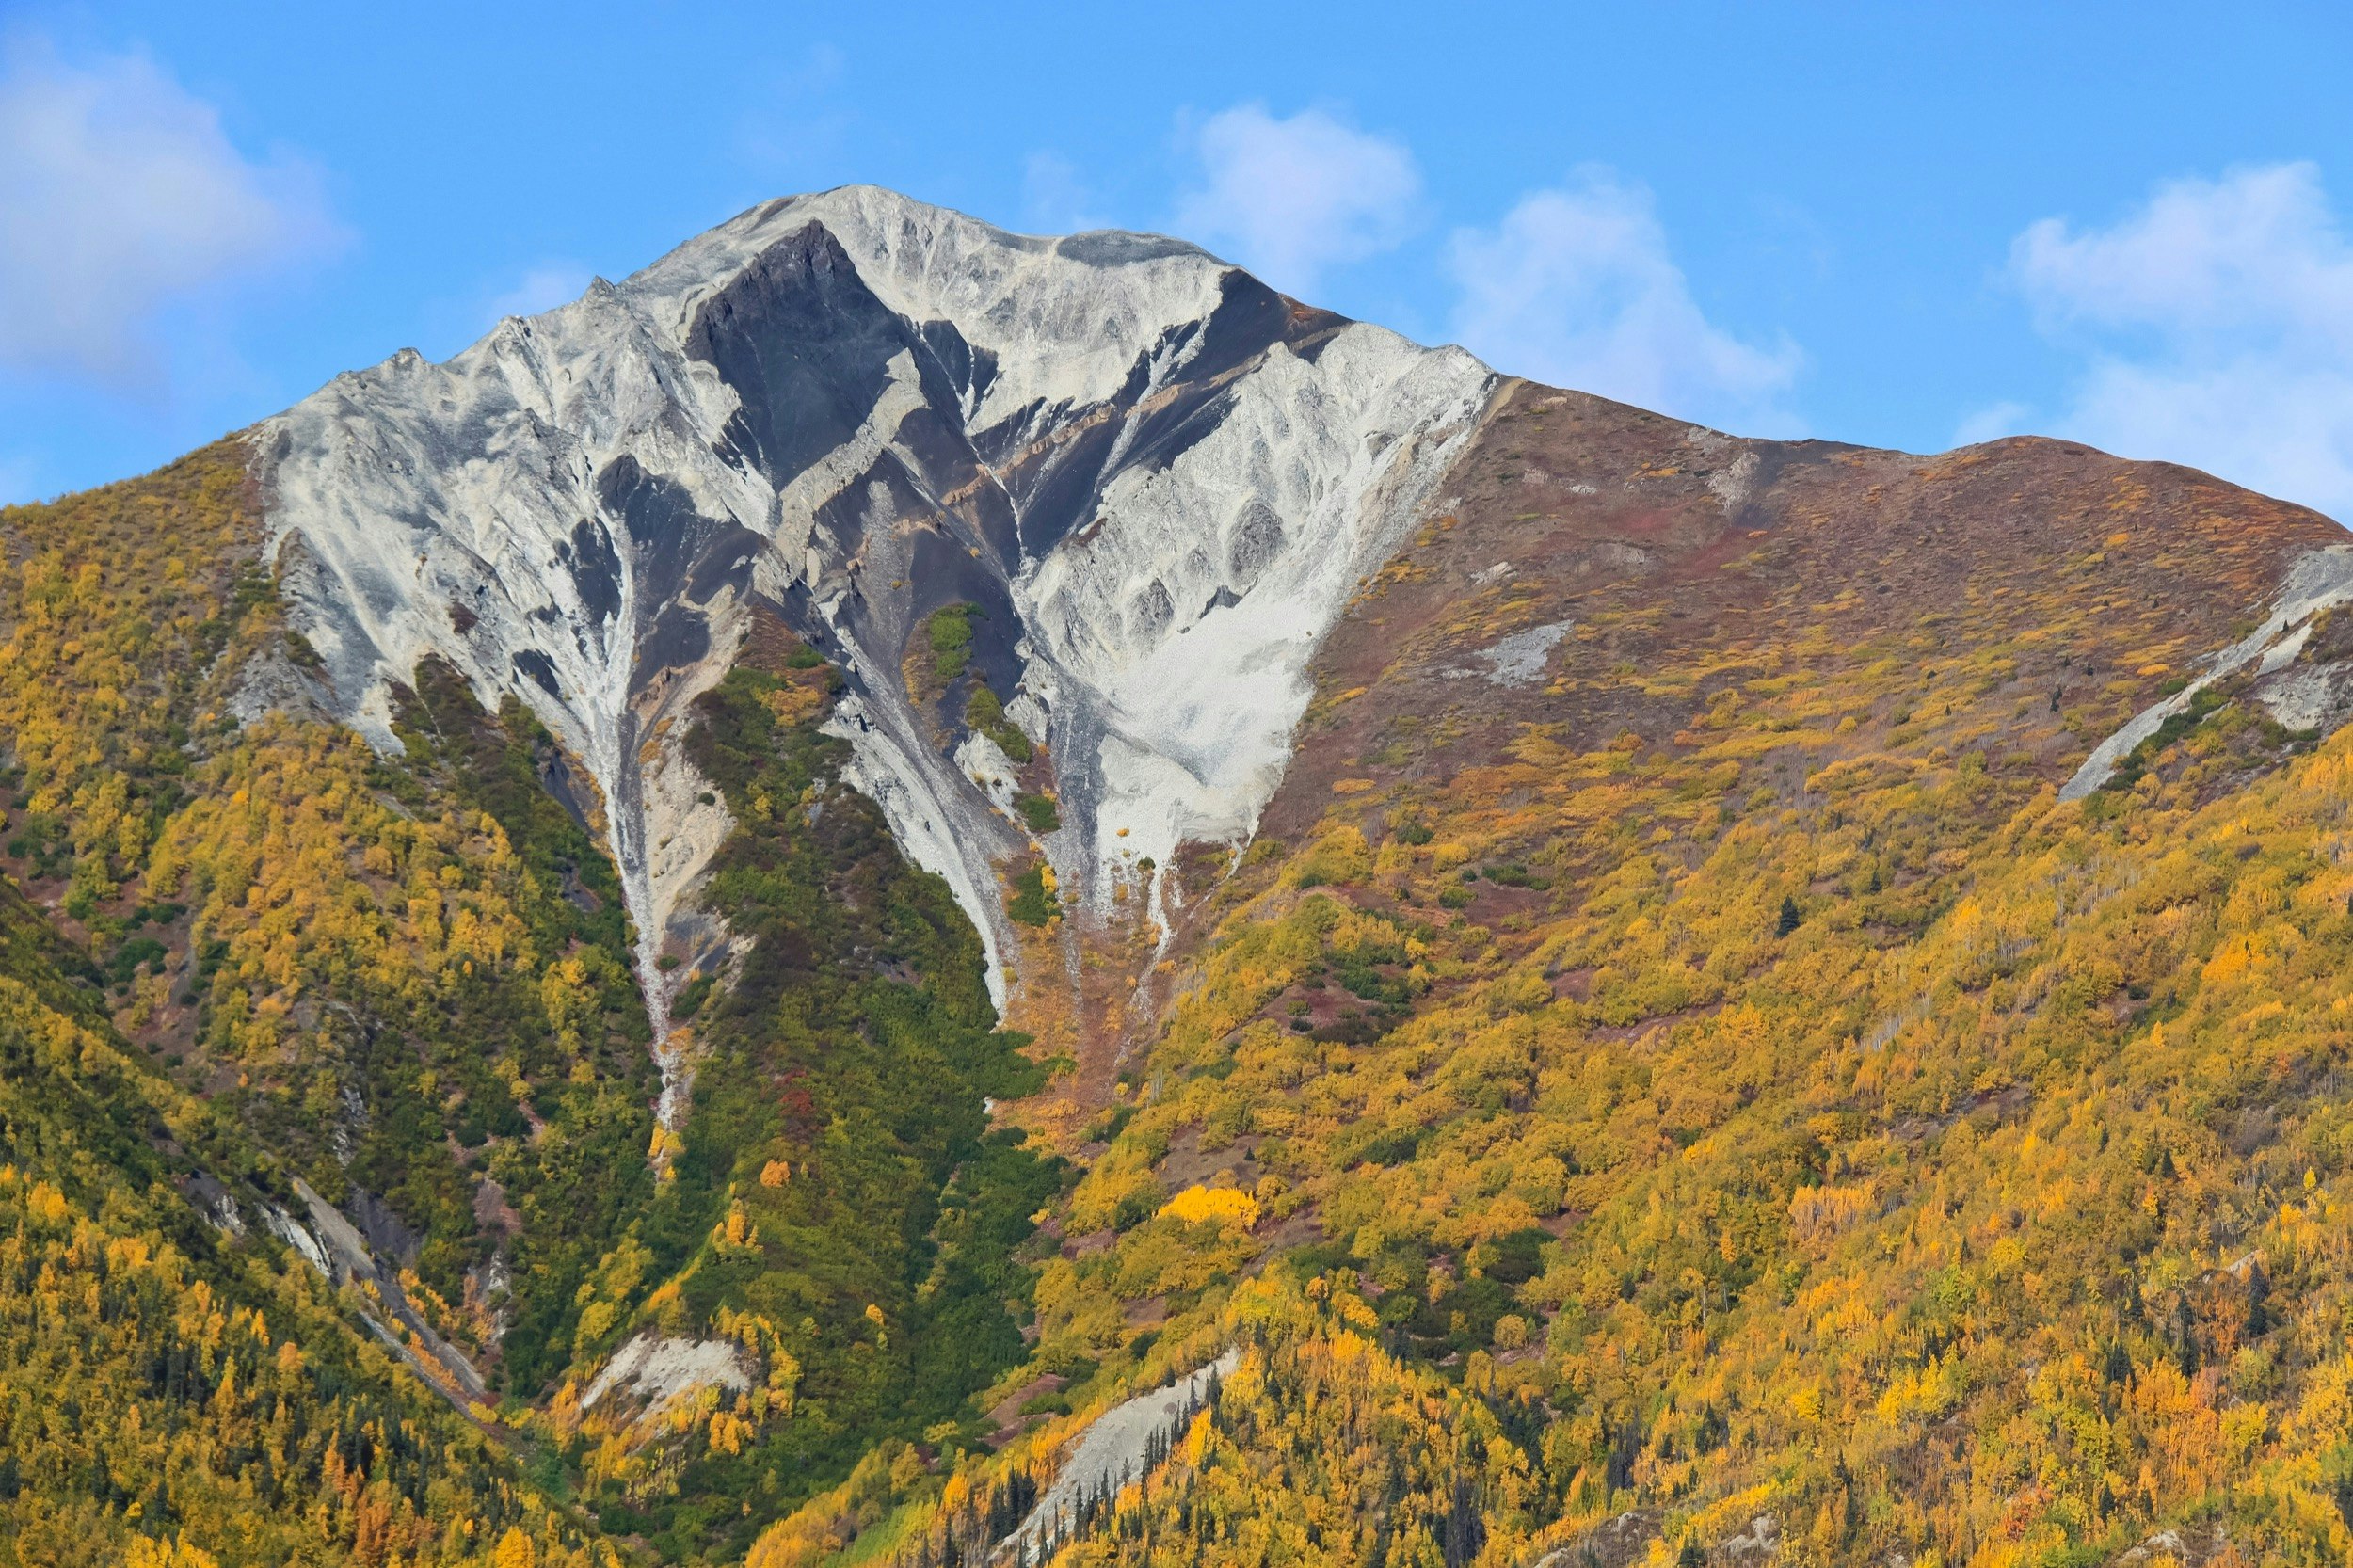 Fall colors mix with geologic colors on Wrangell Mountains near McCarthy, Alaska 